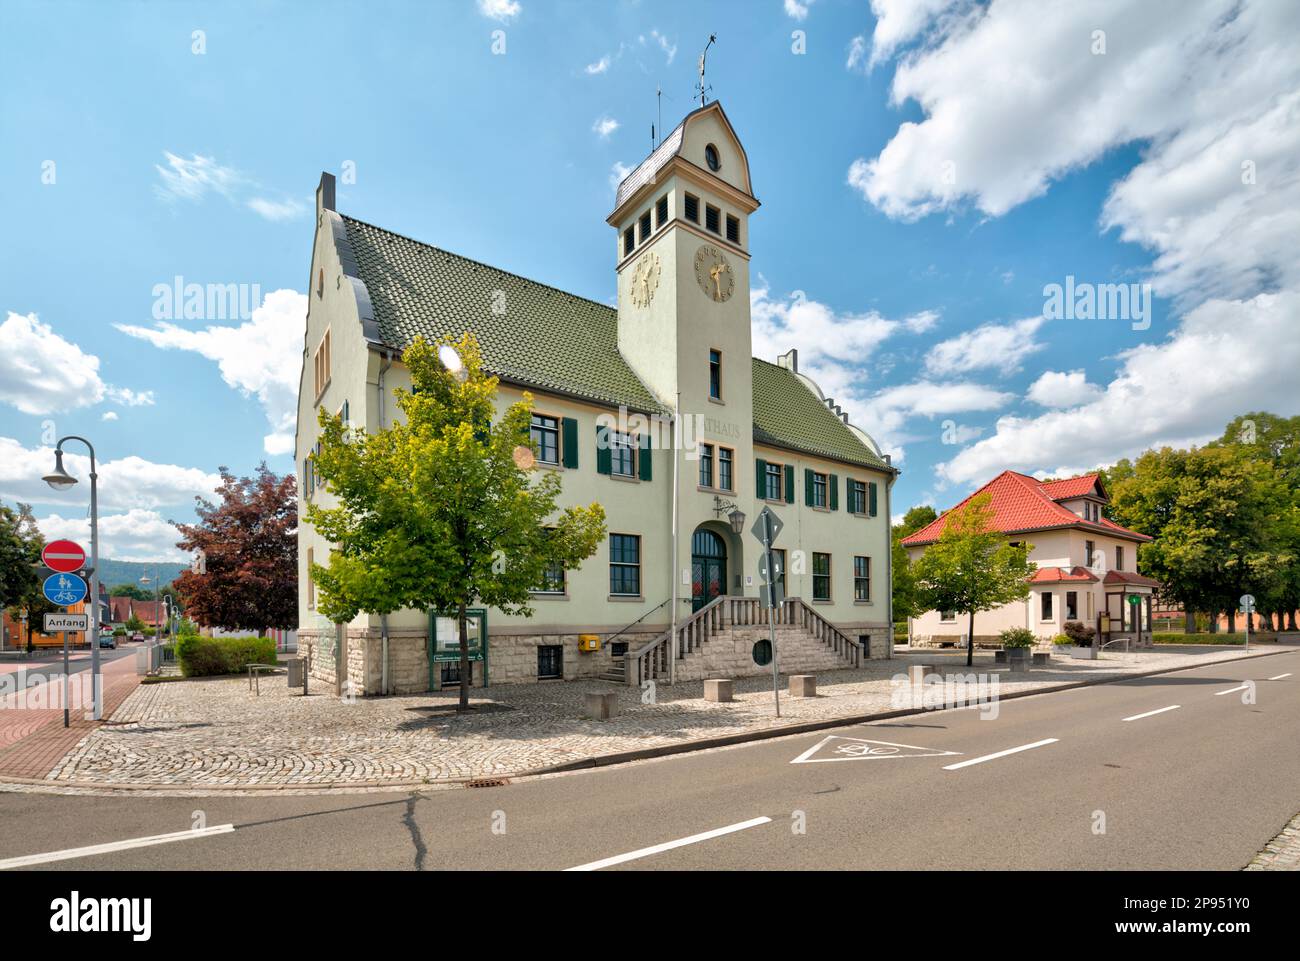 Town hall, administration, house facade, historical, Breitungen, Werra, Thuringia, Germany, Stock Photo